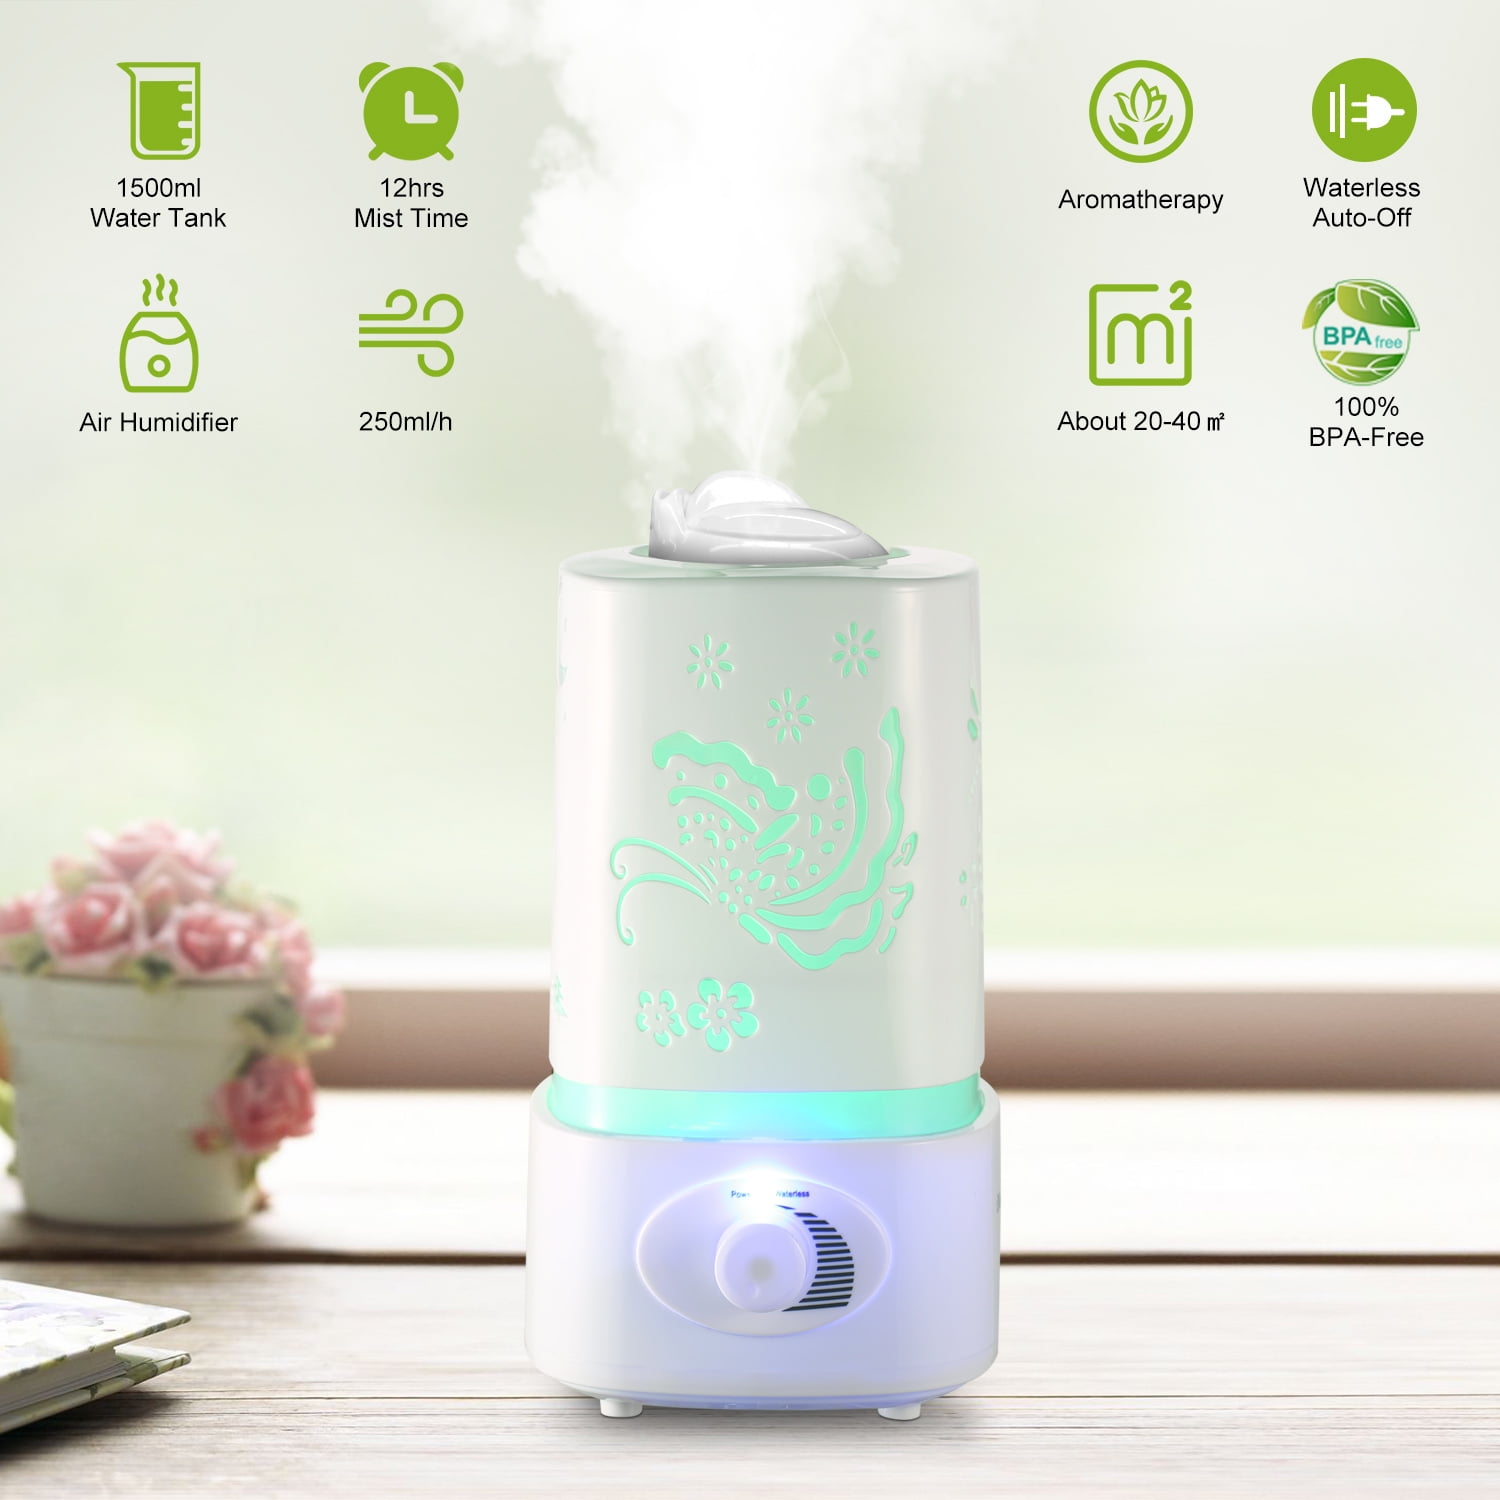 LED Ultrasonic Aroma Diffuser Oil Essential Humidifier romatherapy Air Purifier 